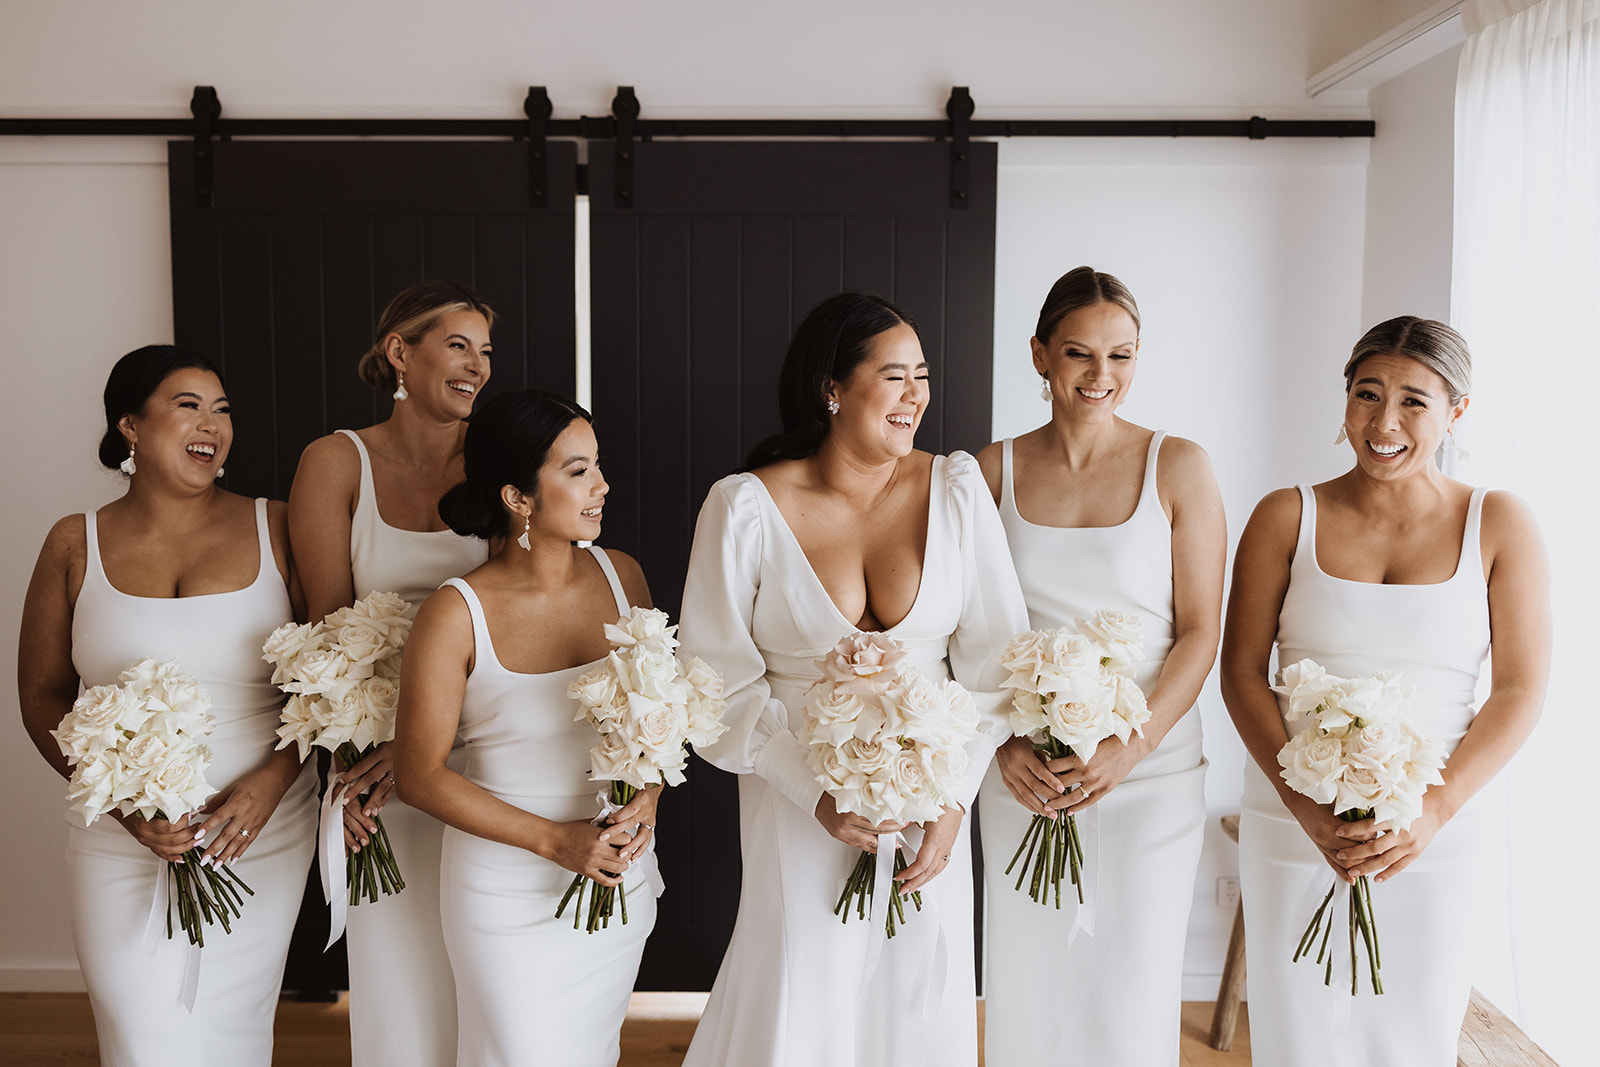 Bride with her bridesmaids wearing gown and holding flower bouquet